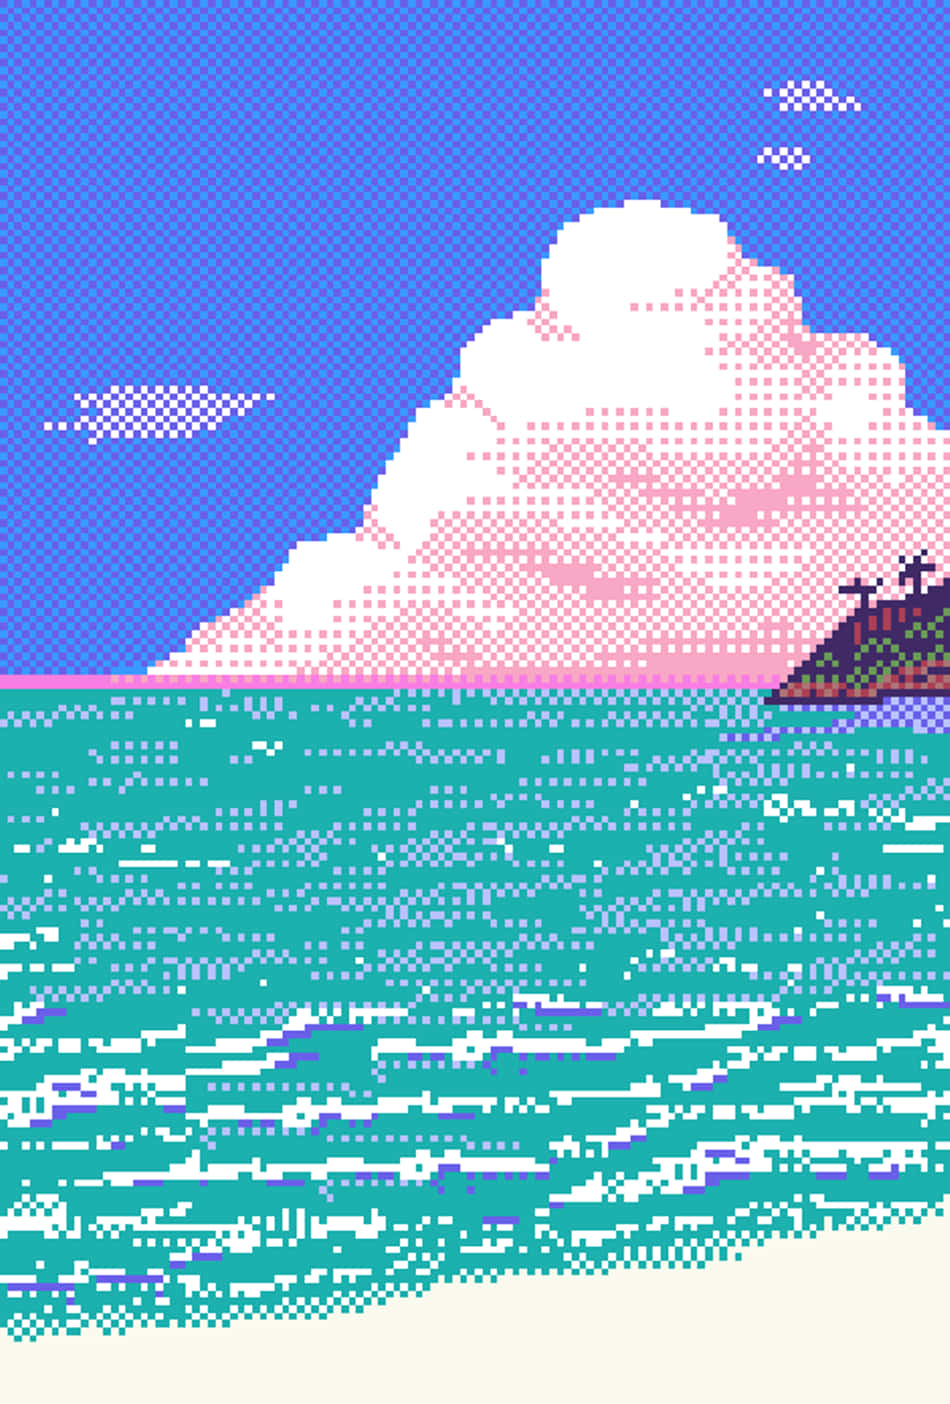 A Pixelated Image Of A Beach With A Cloud Wallpaper